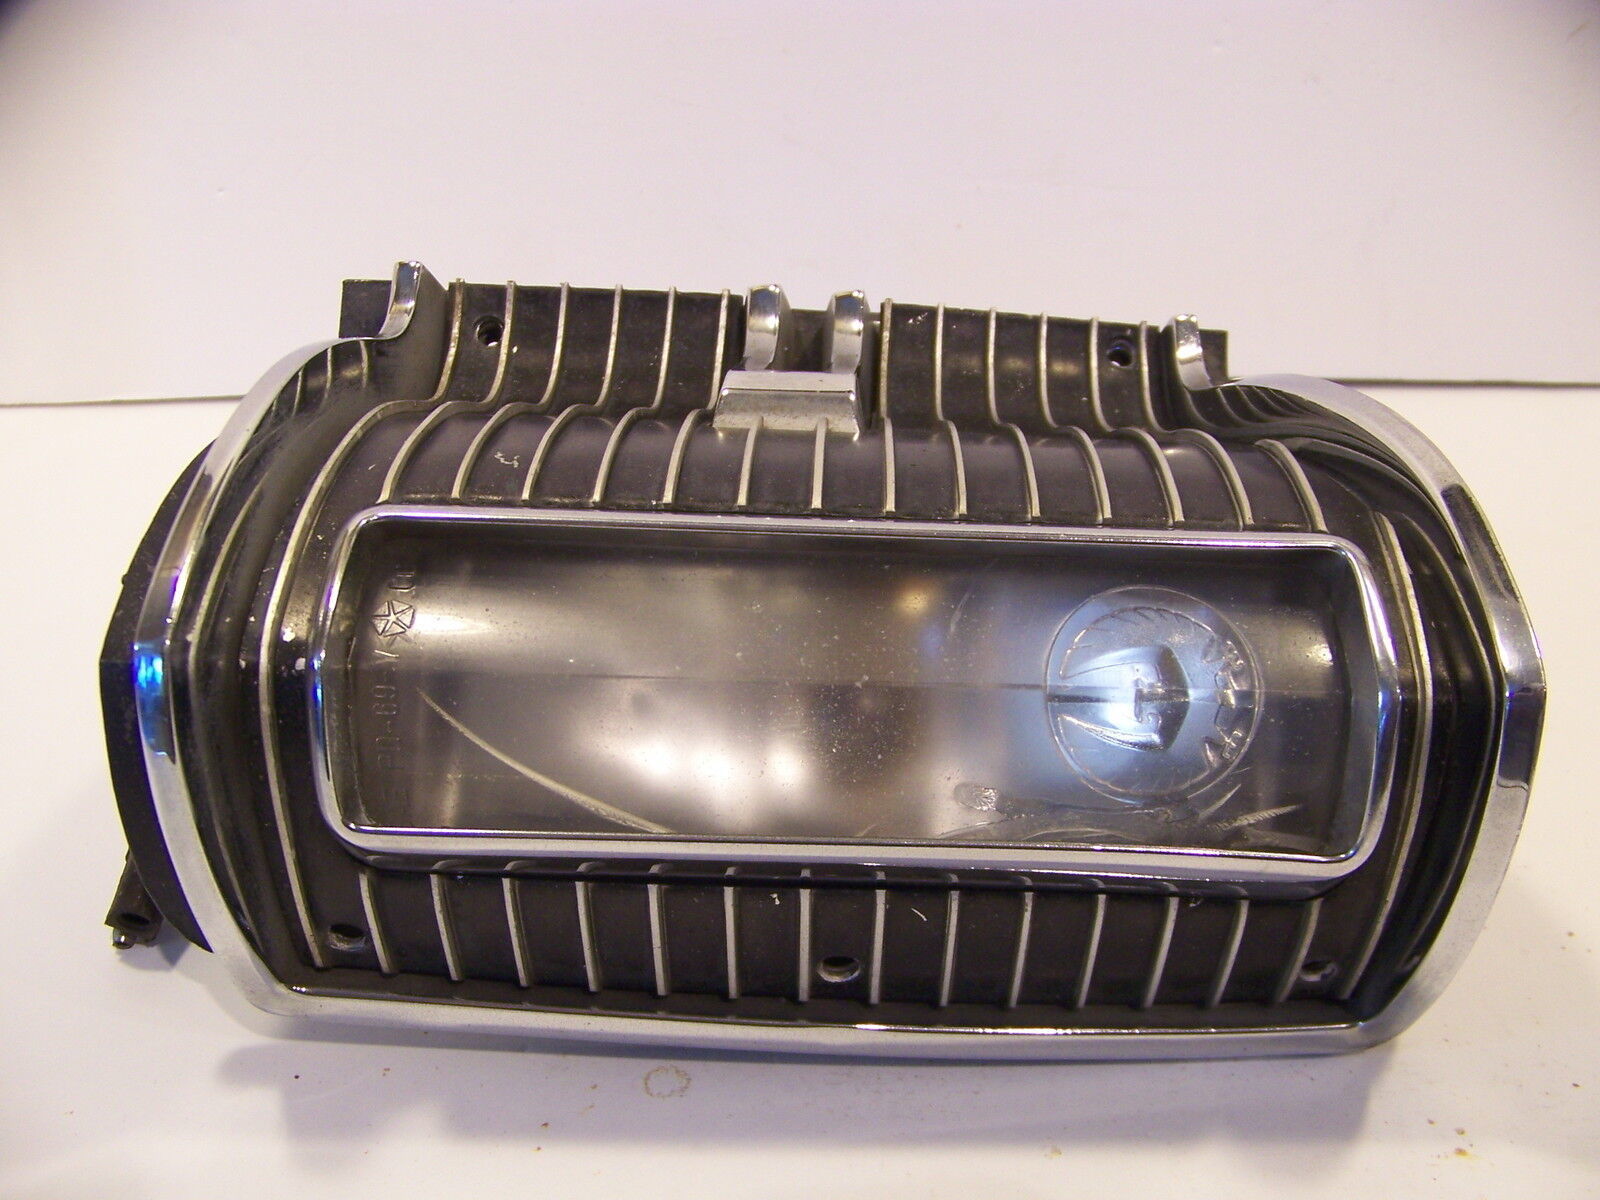 Primary image for 1969 CHRYSLER IMPERIAL RH FRONT TURN SIGNAL ASSY COMPLETE OEM #2930520 LEBARON